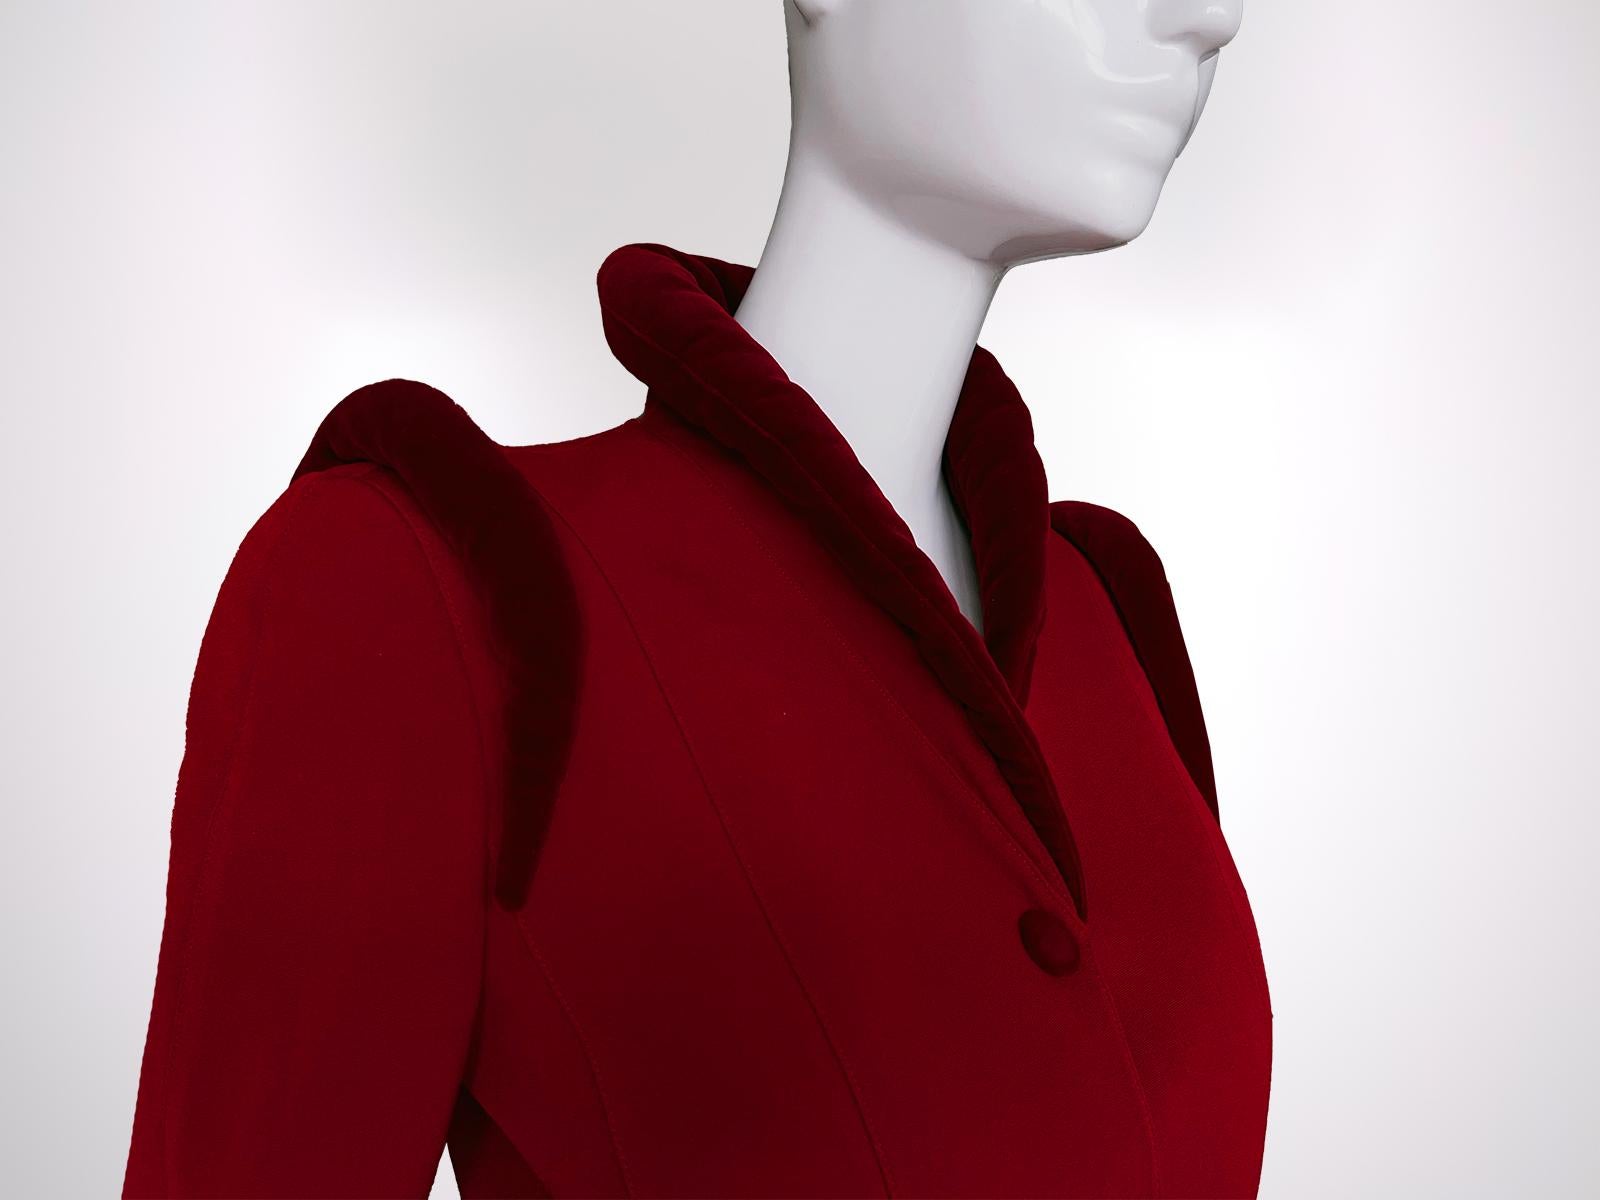 Gorgeous rare Thierry Mugler jacket, assuming FW 1997 Collection.
It features strong, structured shoulders with dramatic rounded velvet padding that is reminiscent of his love for exaggerated and powerful silhouettes. High, stand-up collar, which